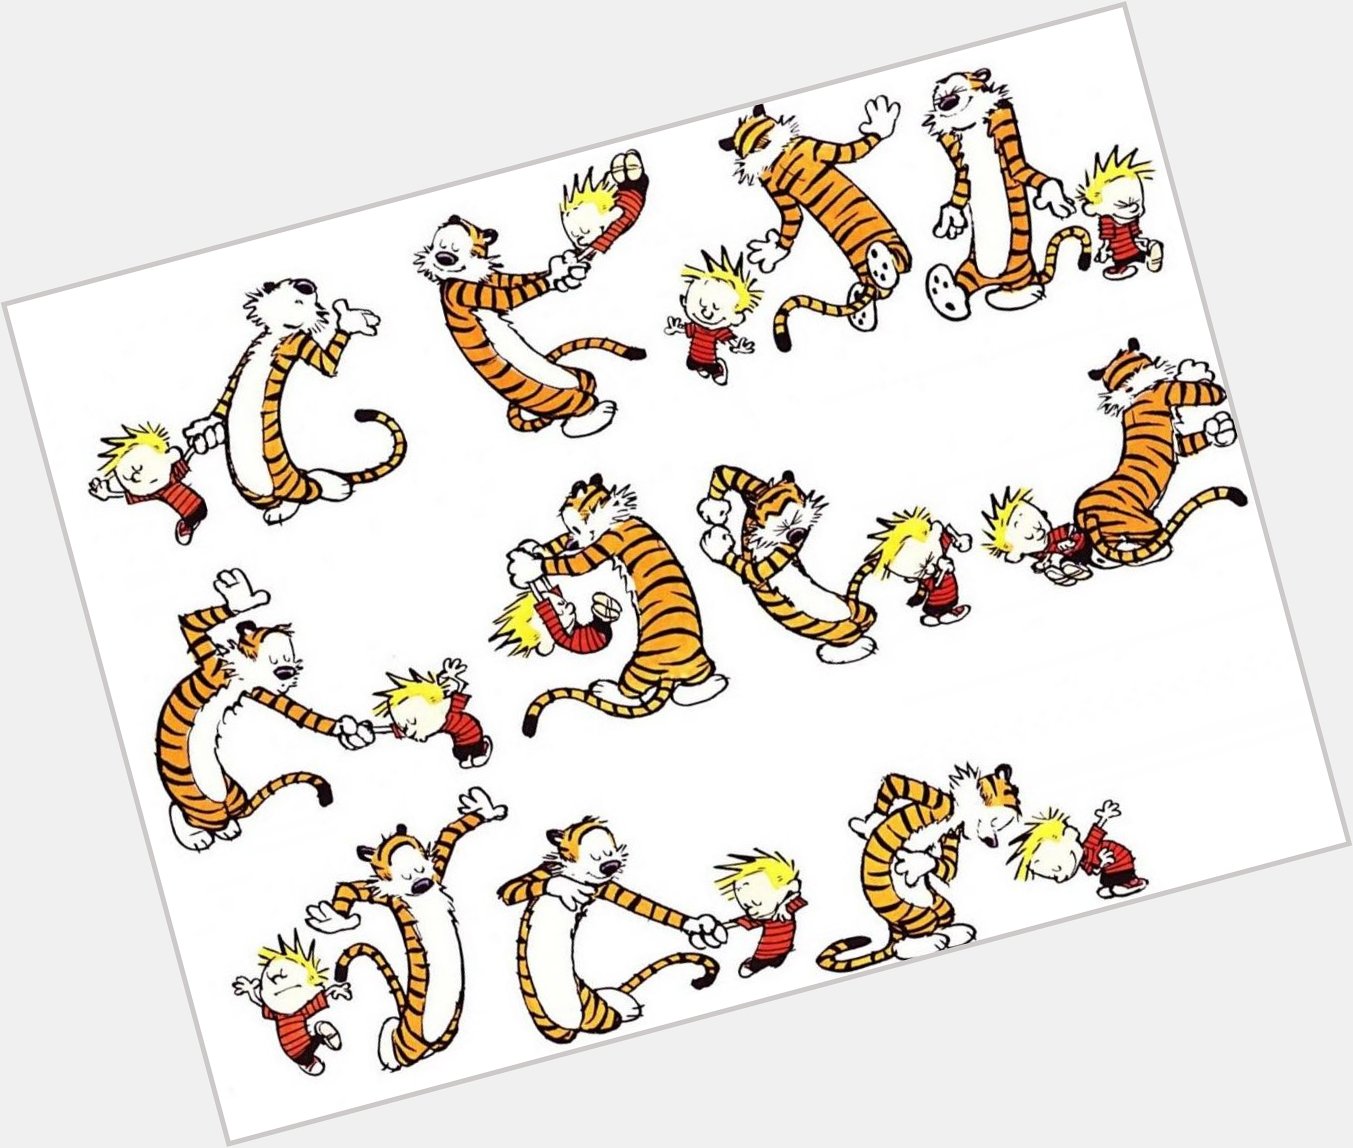 Happy Birthday Bill Watterson The world is more graceful because of your gentle comic strips. 